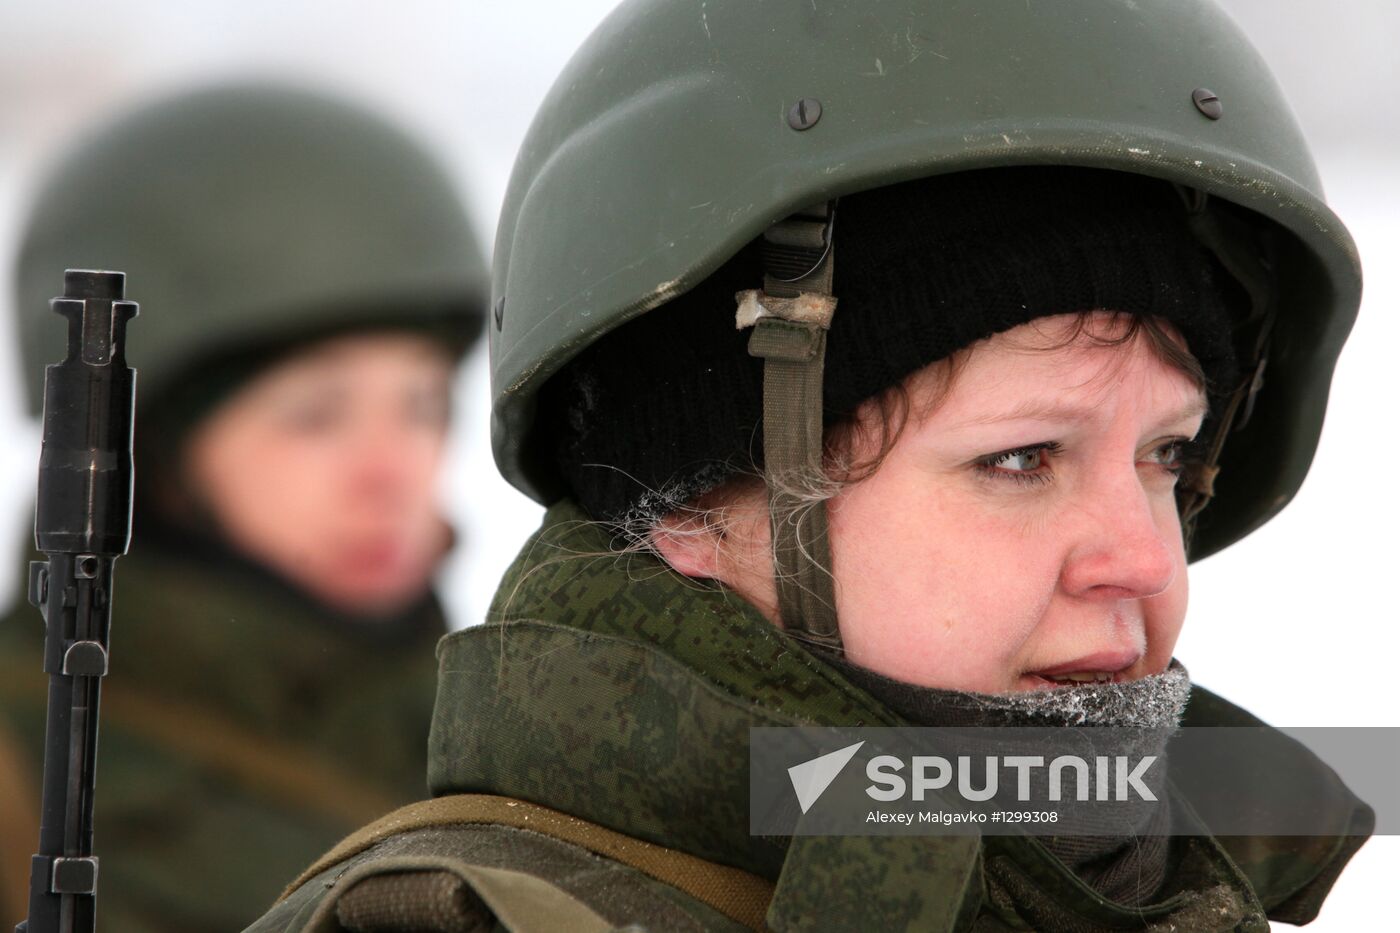 Airborne forces training in Omsk region